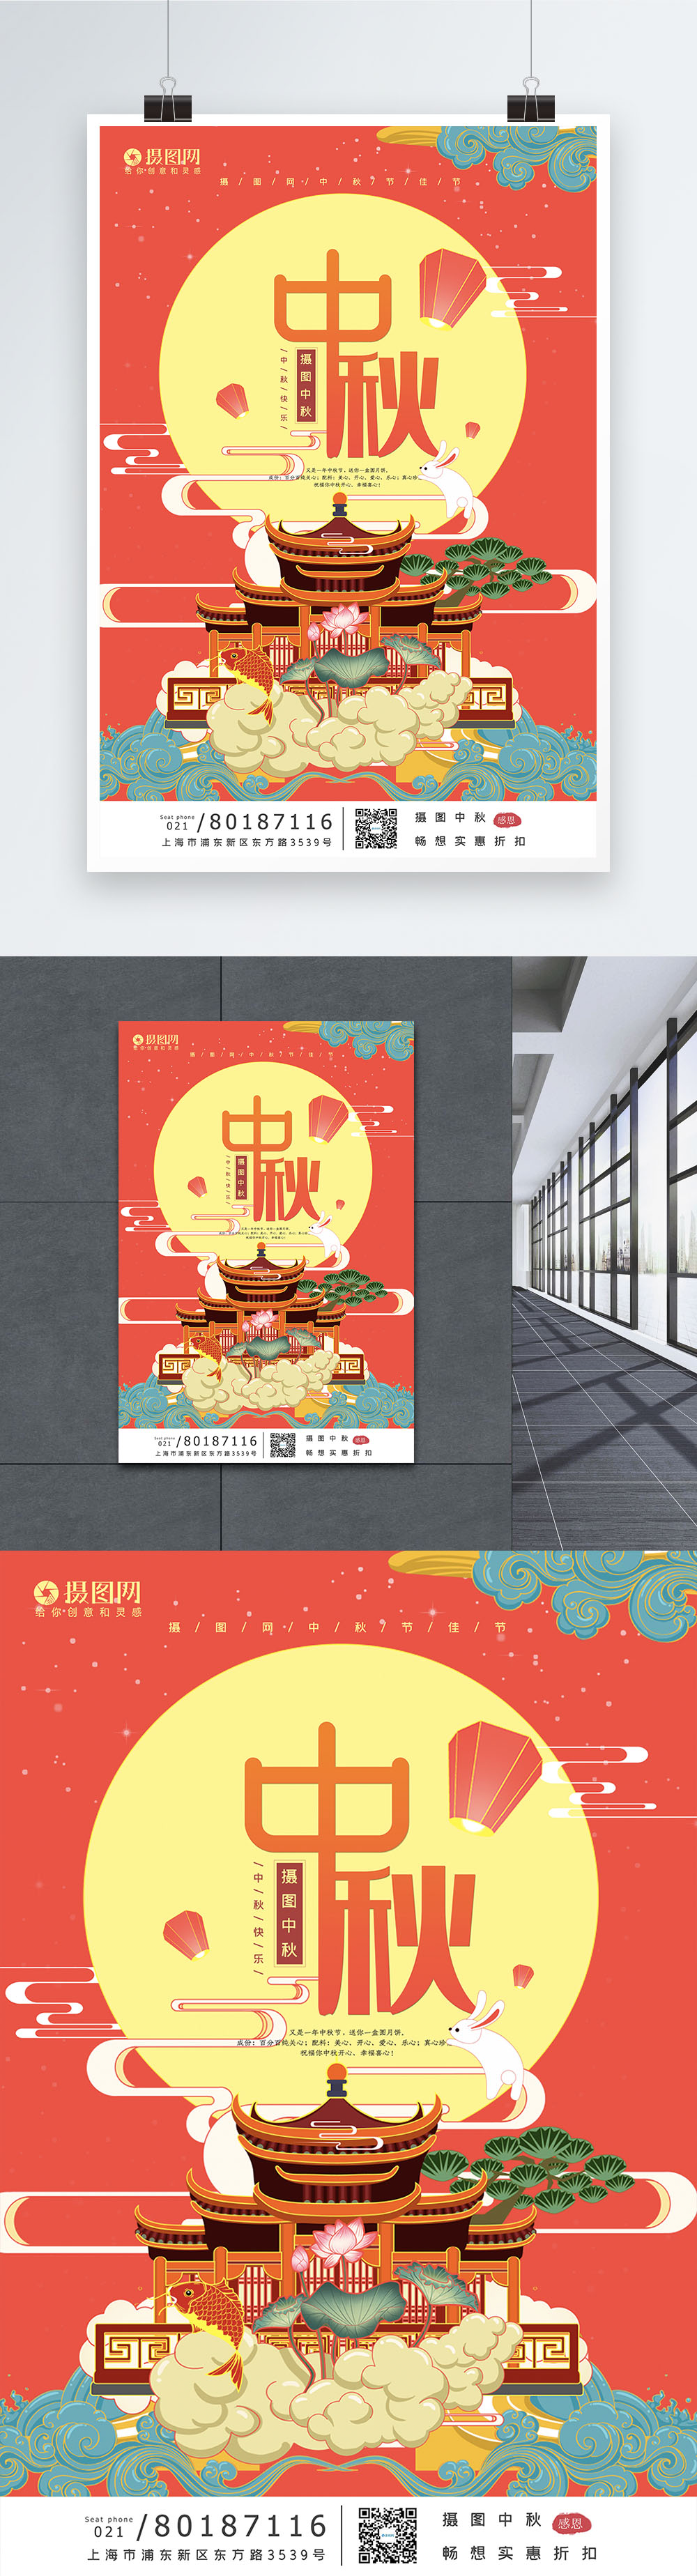 chinese-mid-autumn-festival-poster-template-image-picture-free-download